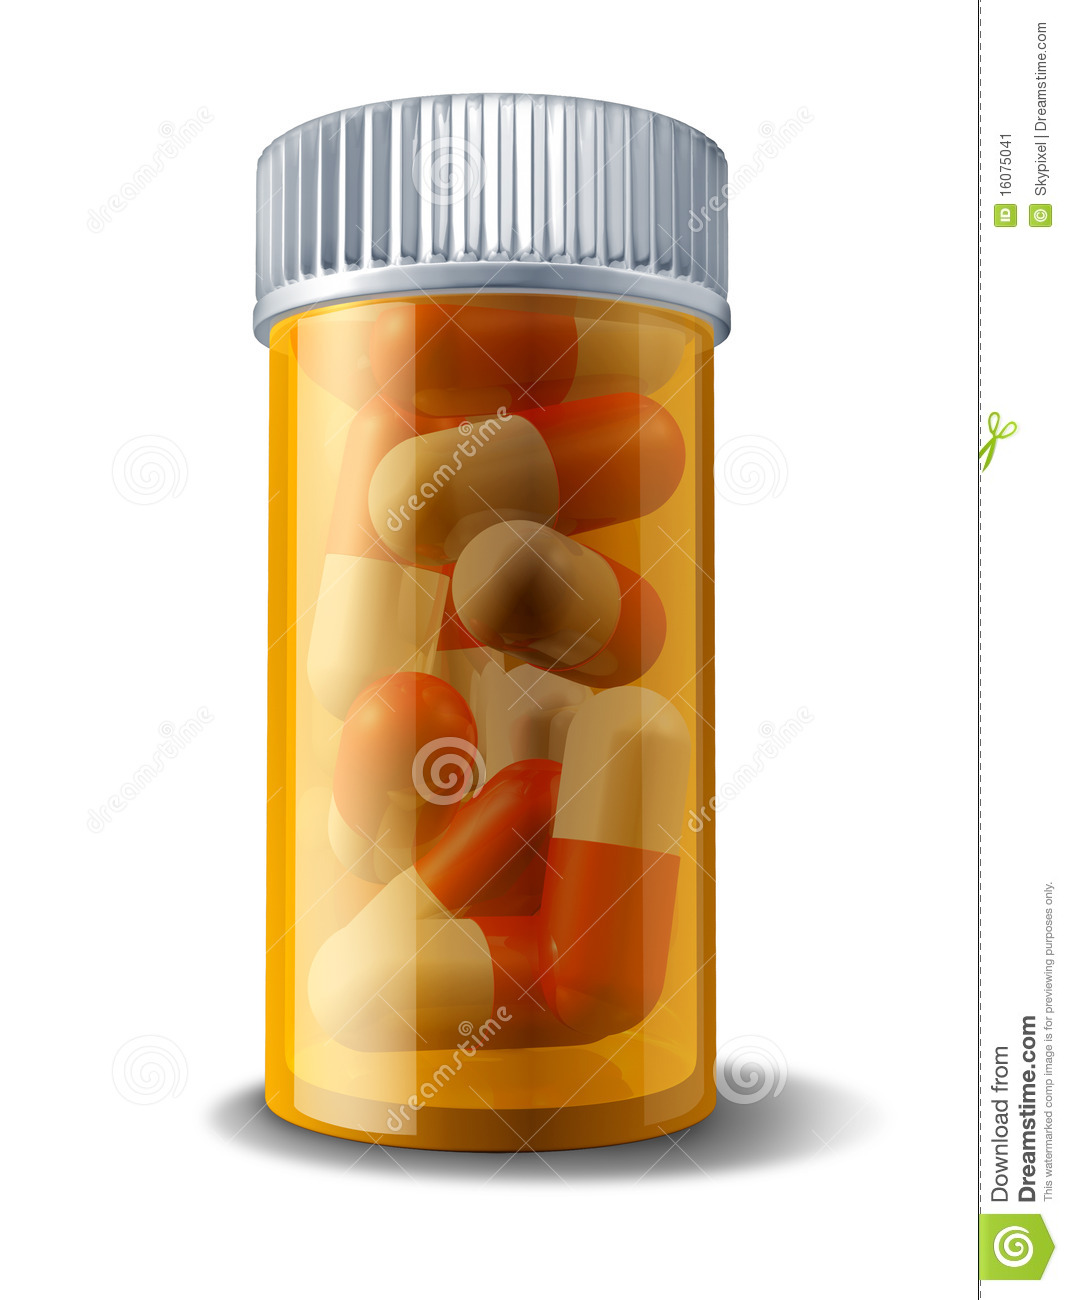 Pill Bottle Symbol With Prescription Drugs For Pharmacy And Patient